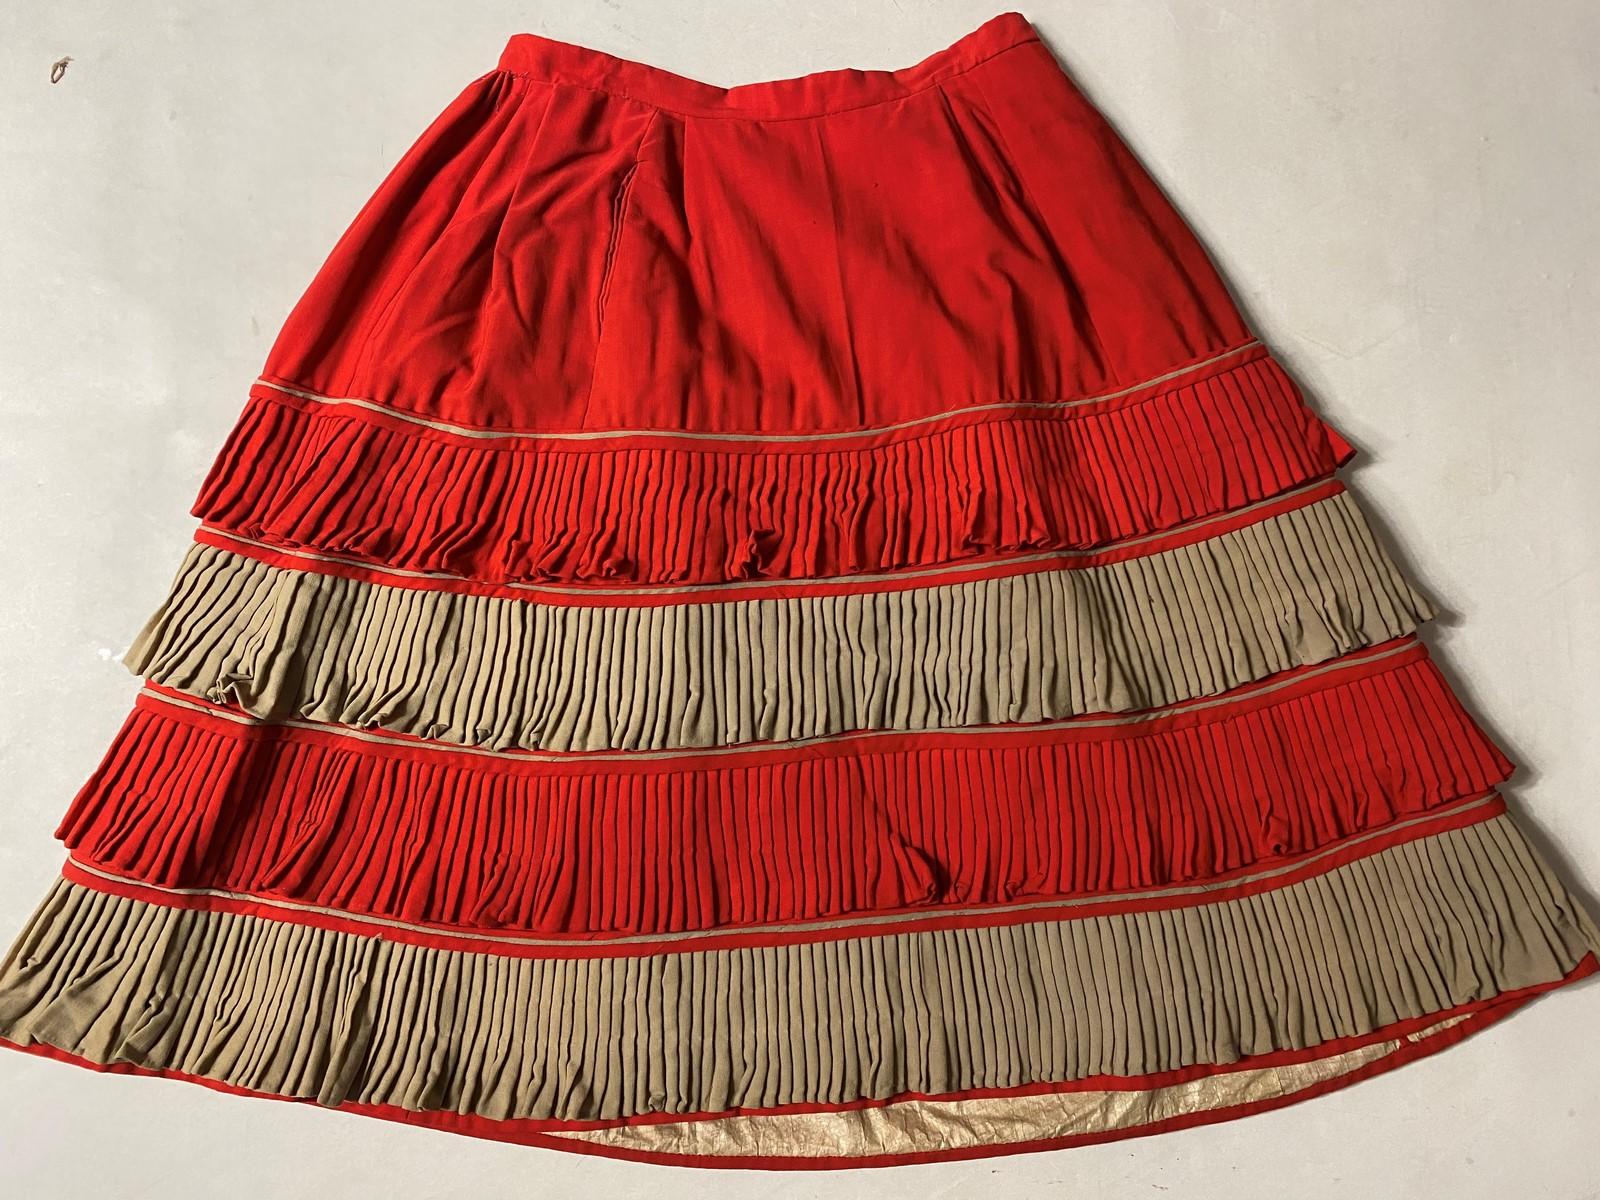 An Historical Circus, Fancy or Memorial Dress in Scarlet Challis USA Circa 1890 For Sale 3